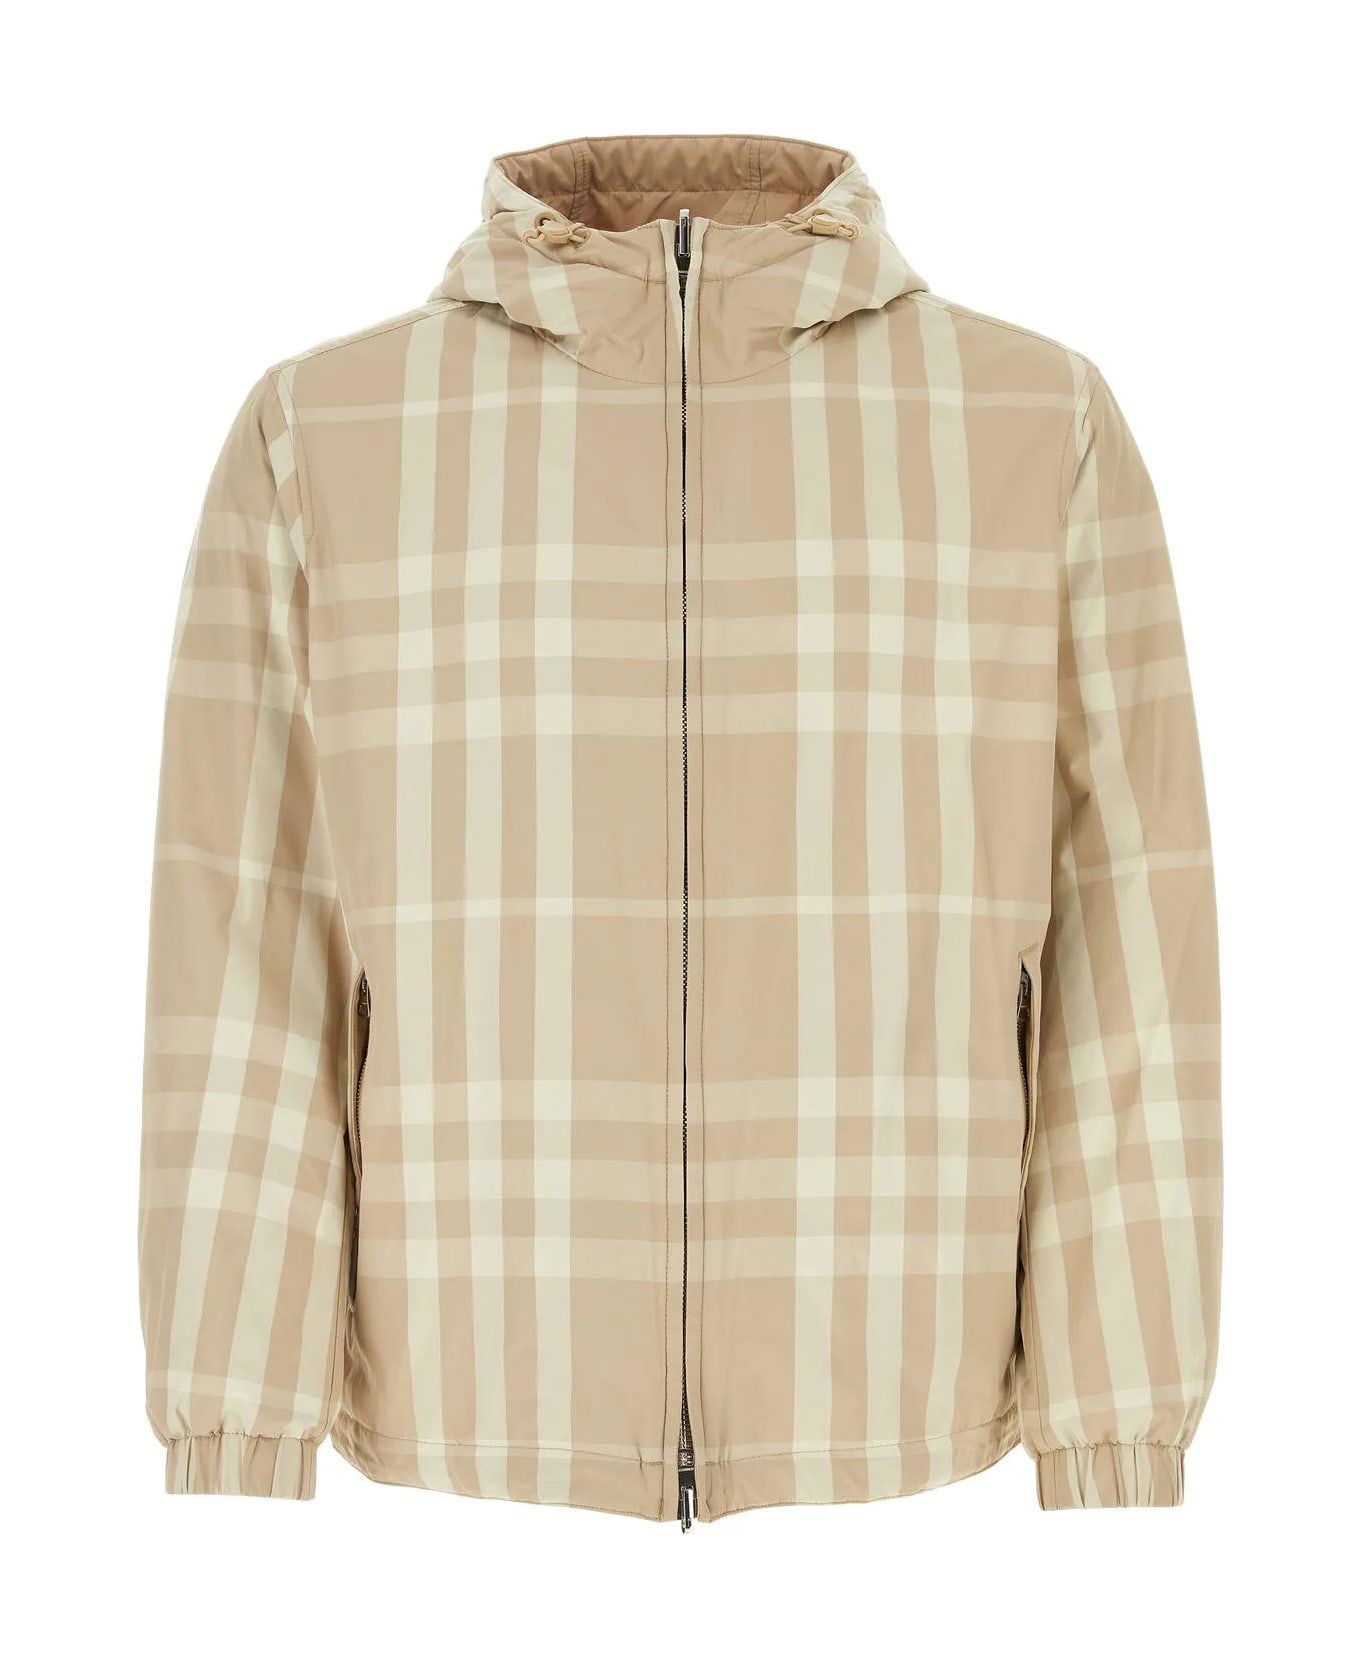 Burberry Embroidered Nylon Reversible Jacket - Beige